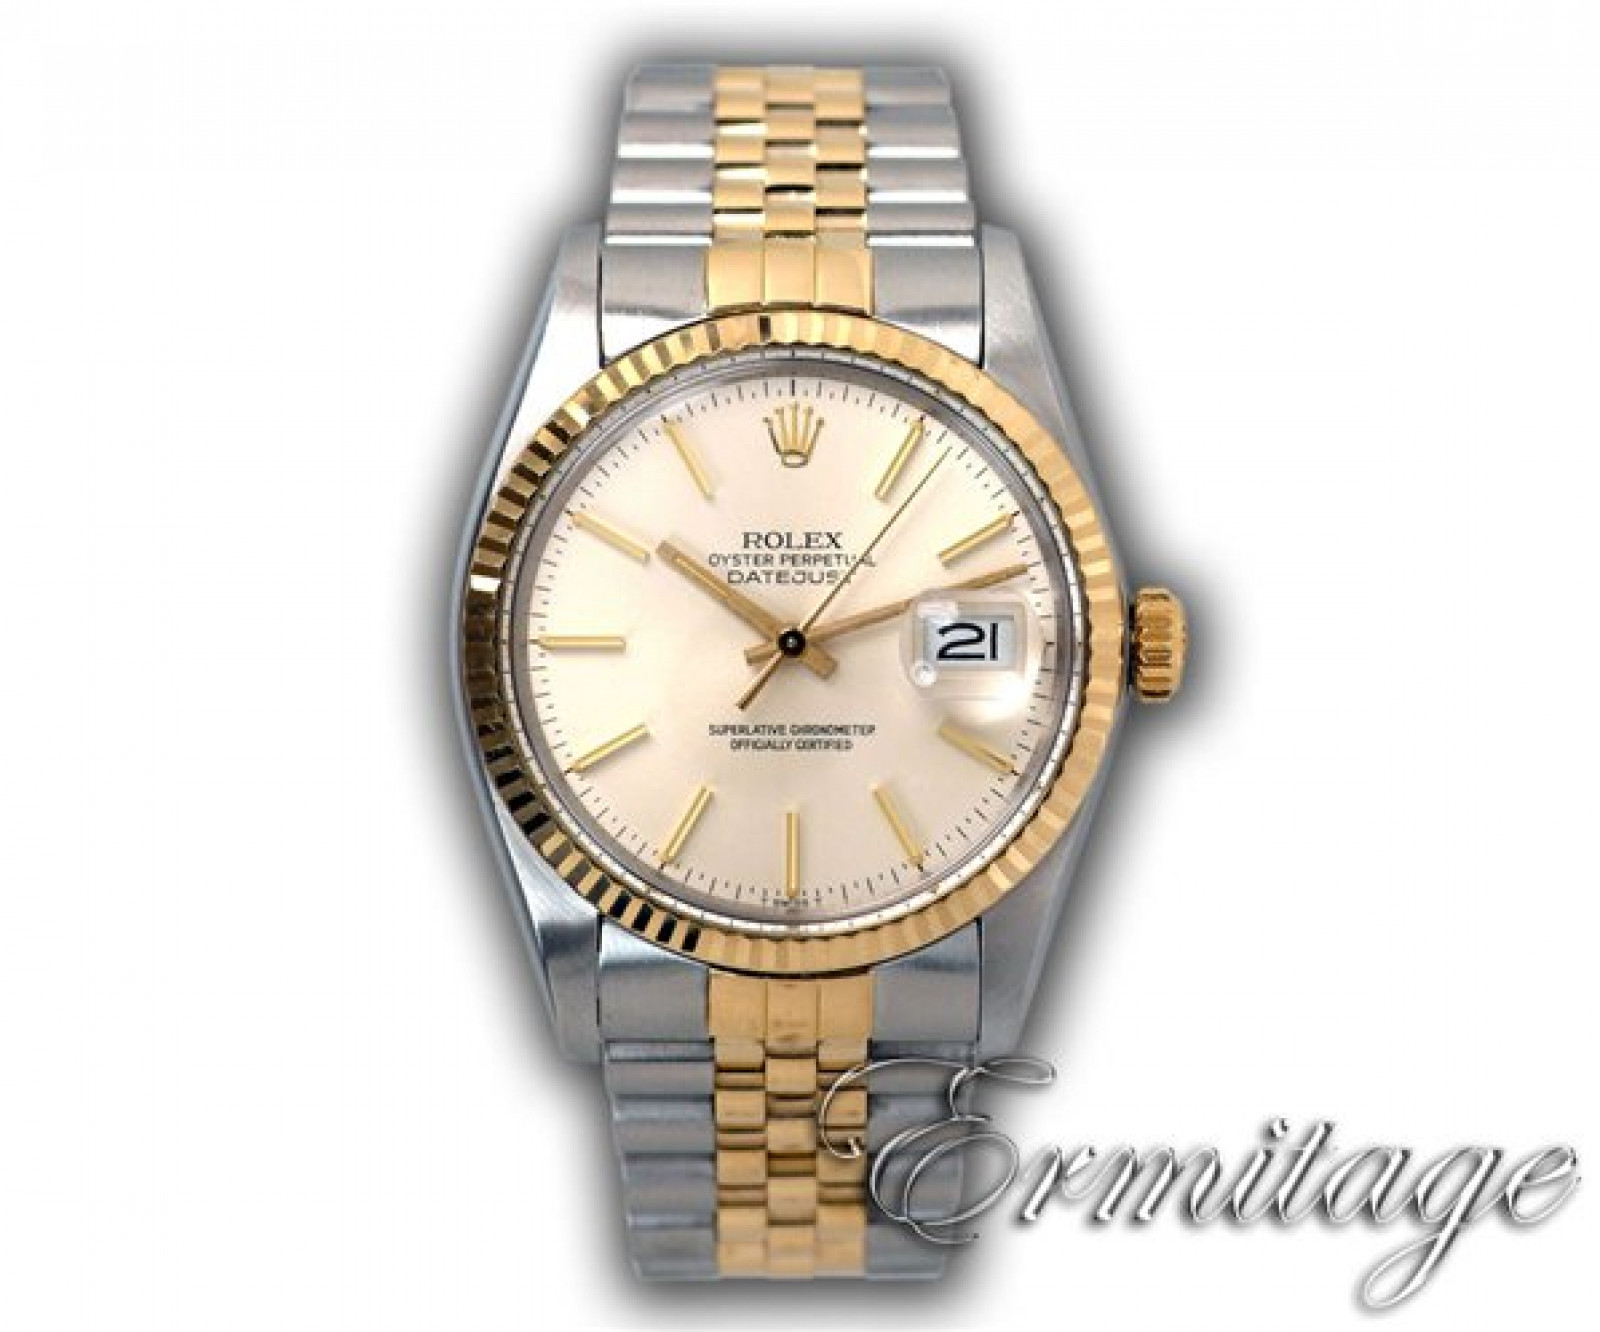 Rolex Datejust Prices for 16013 - Sell Rolex 16013 Today